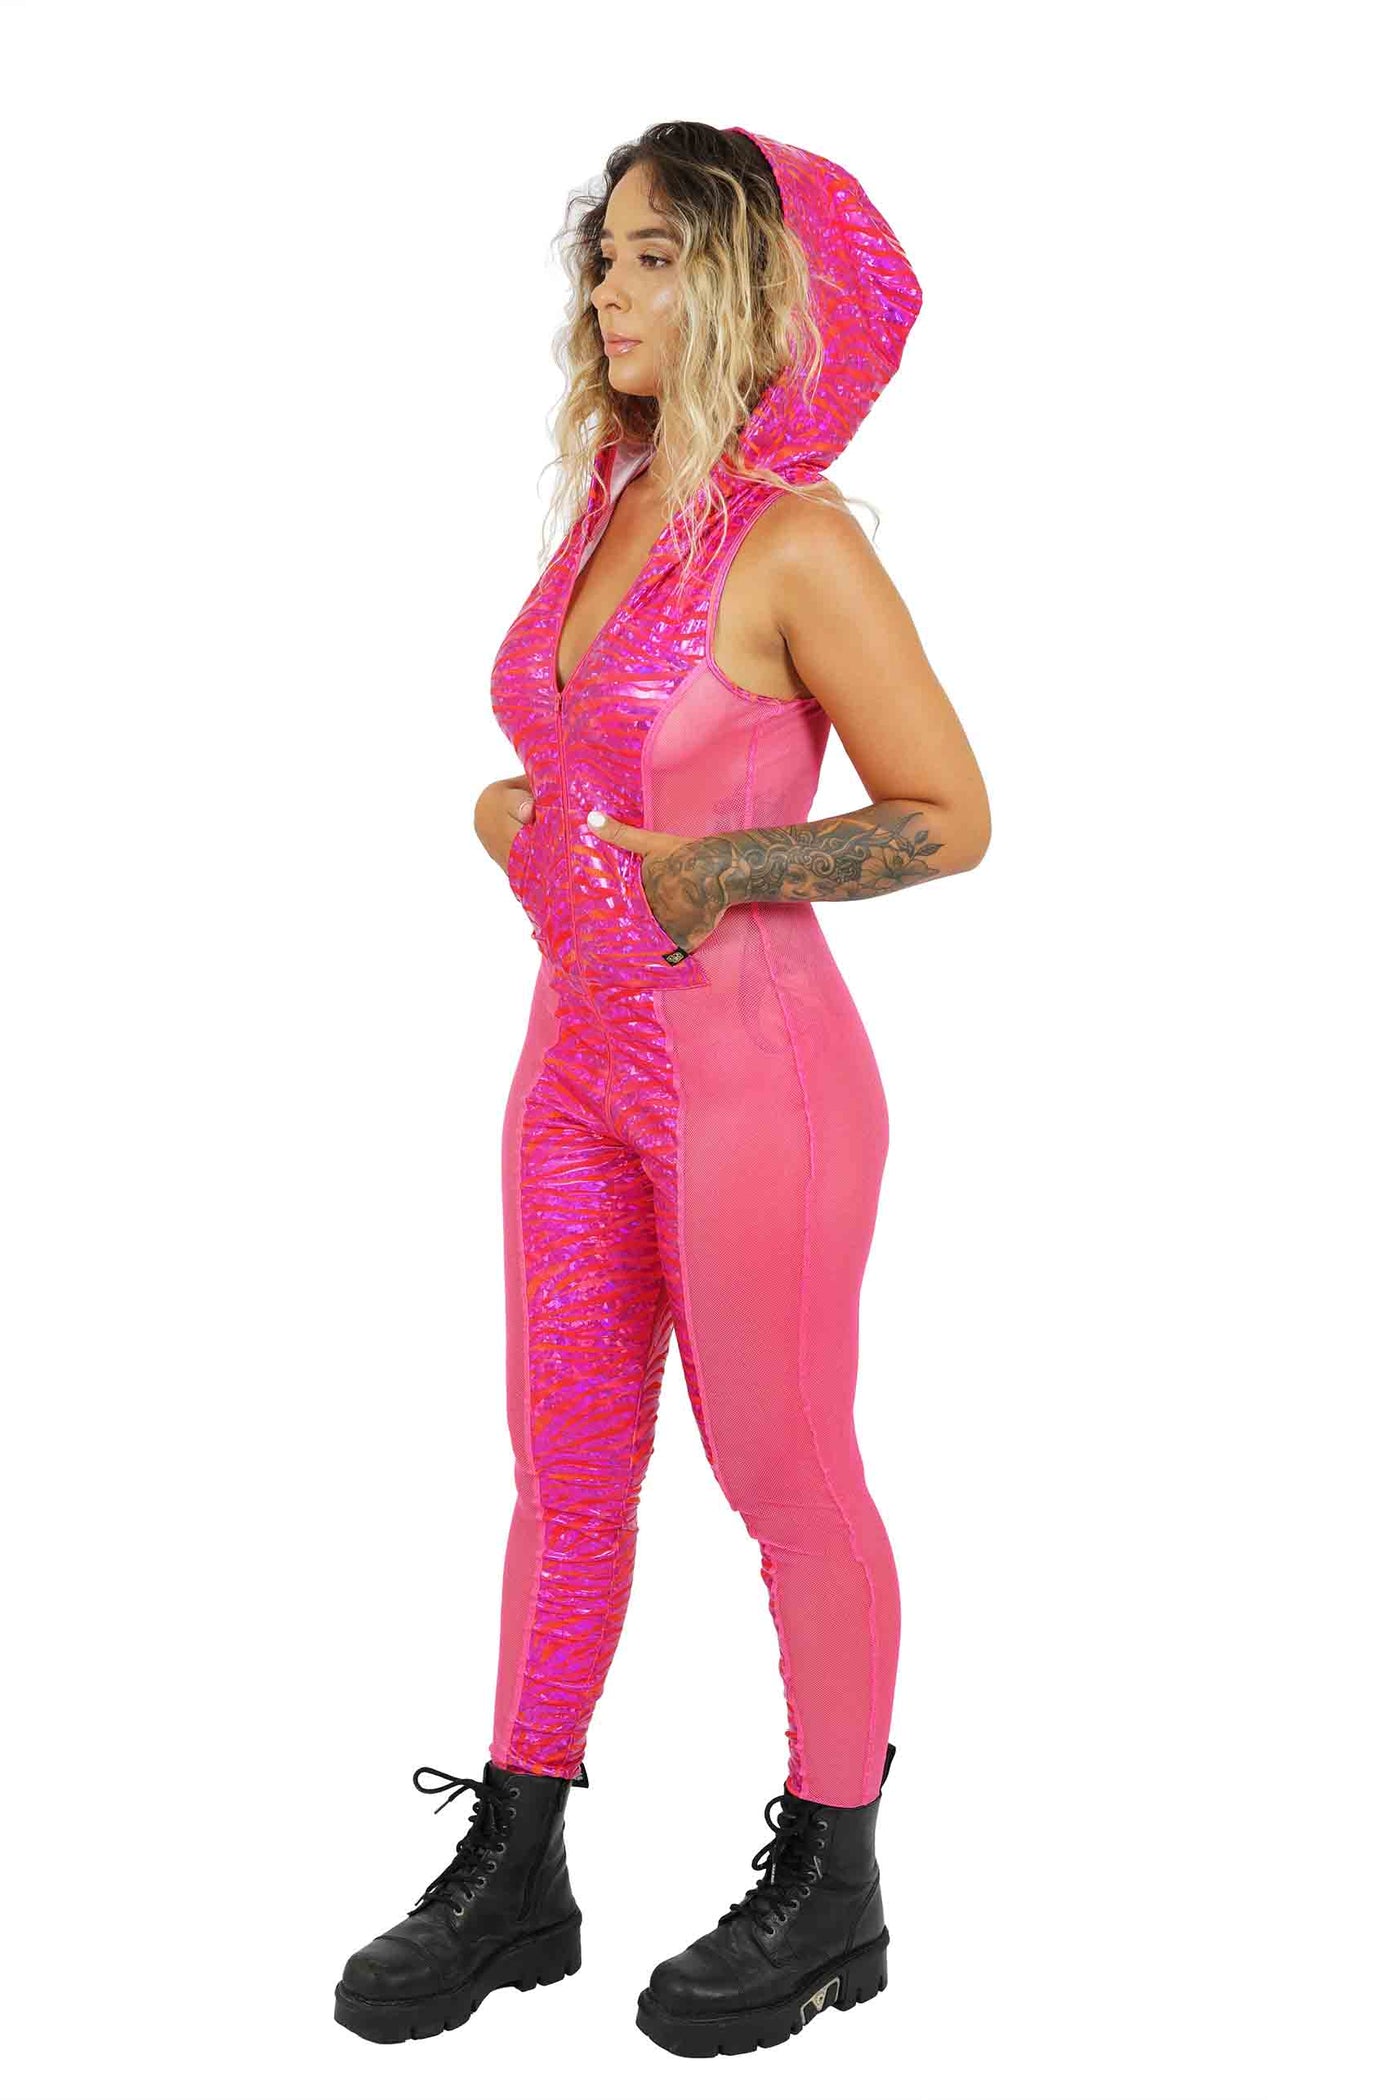 woman wearing  a pink catsuit from Love Khaos